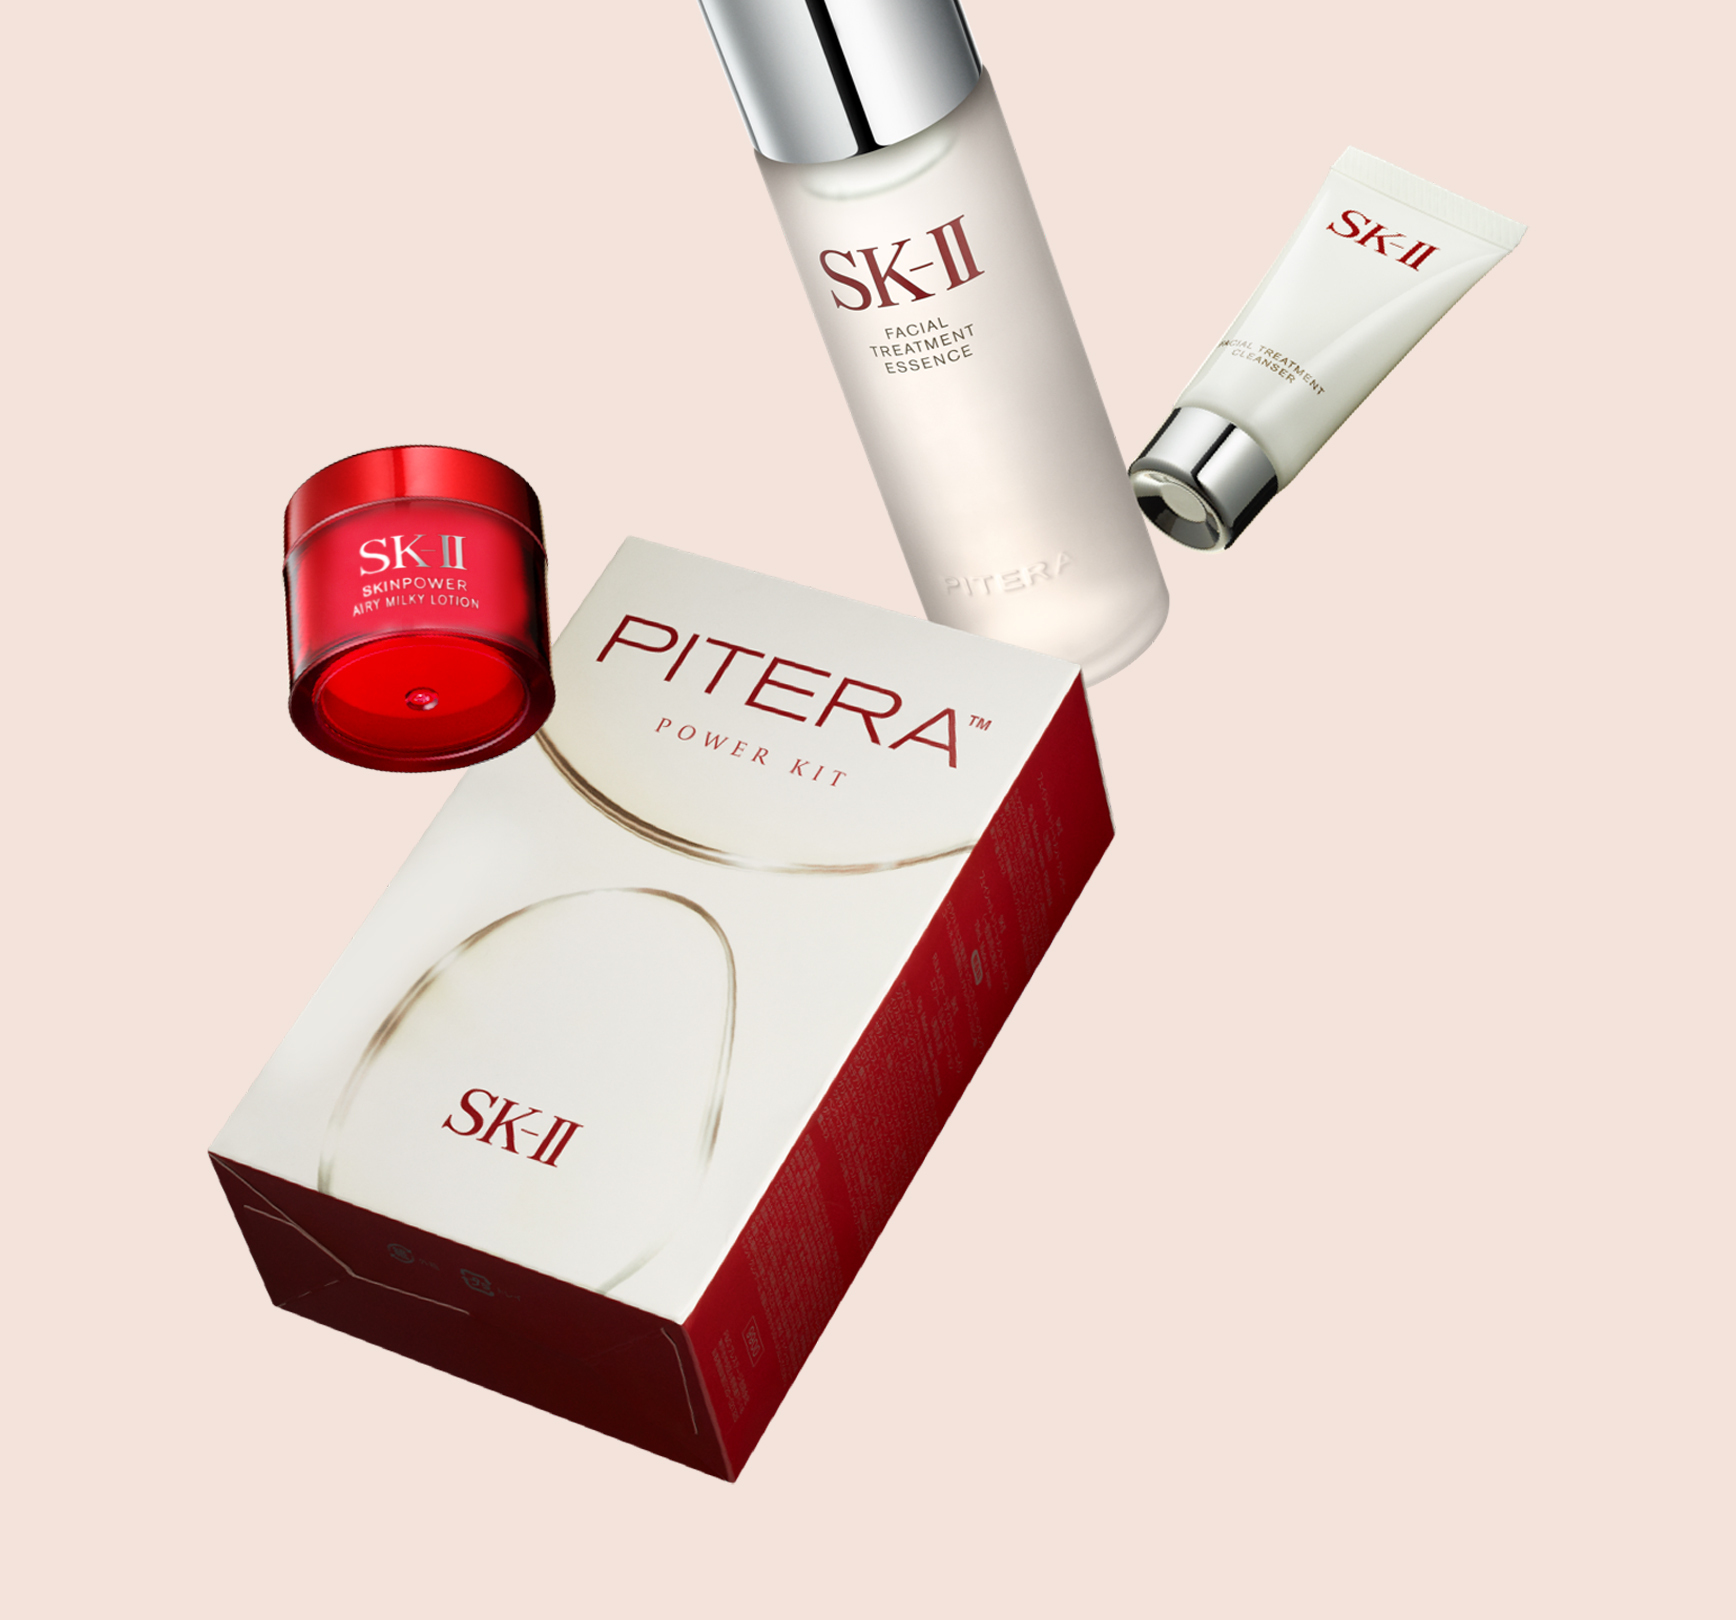 PITERA™ Power Kit - 3 steps for Crystal Clear Skin | SK-II Singapore